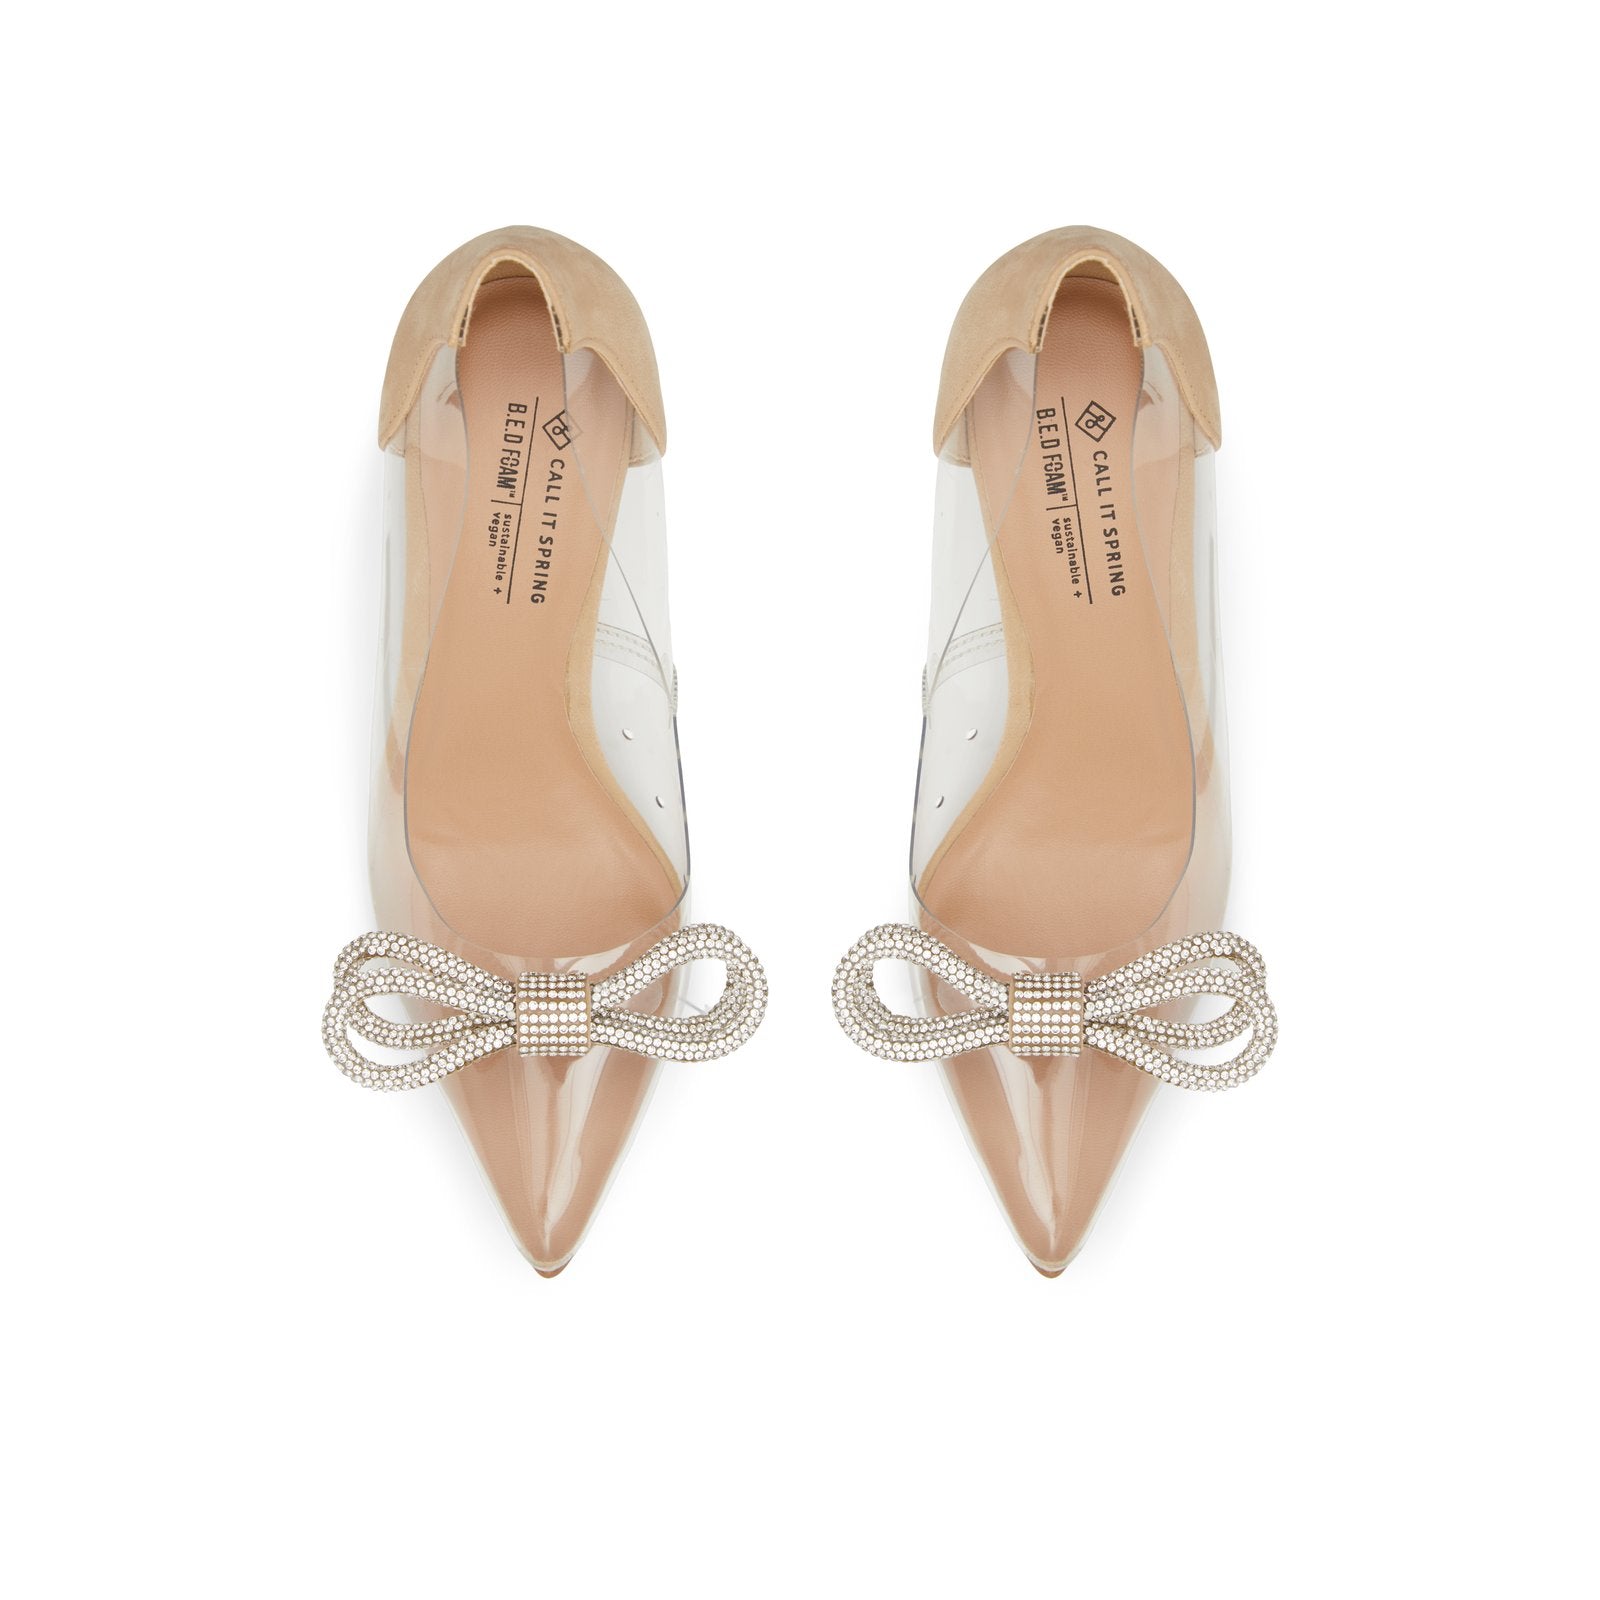 Crystalline Women Shoes - Clear - CALL IT SPRING KSA